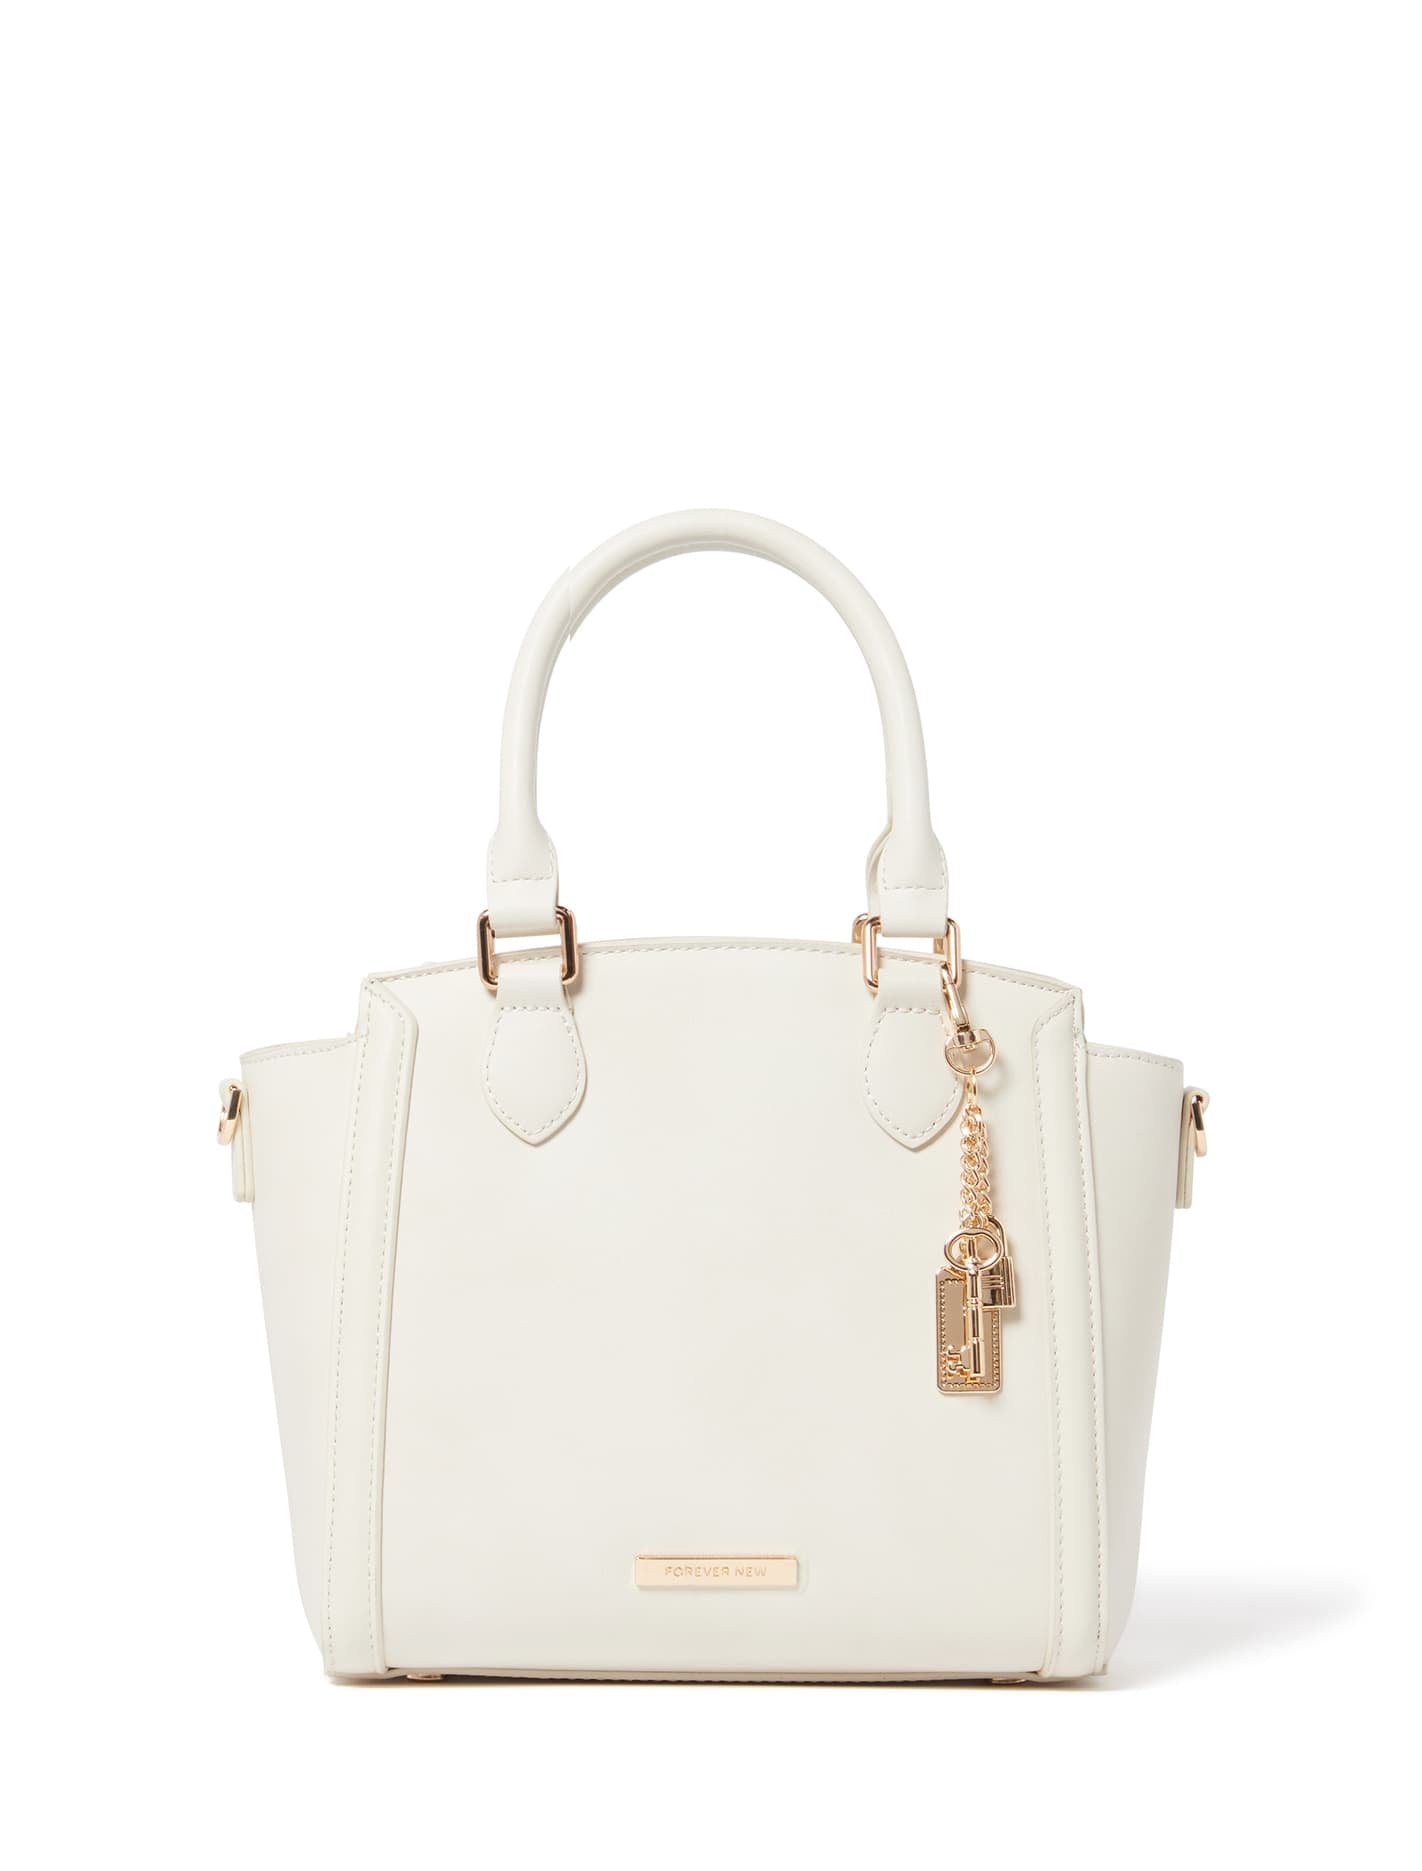 Forever New Bags | Shop Women's Tote Handbags Online